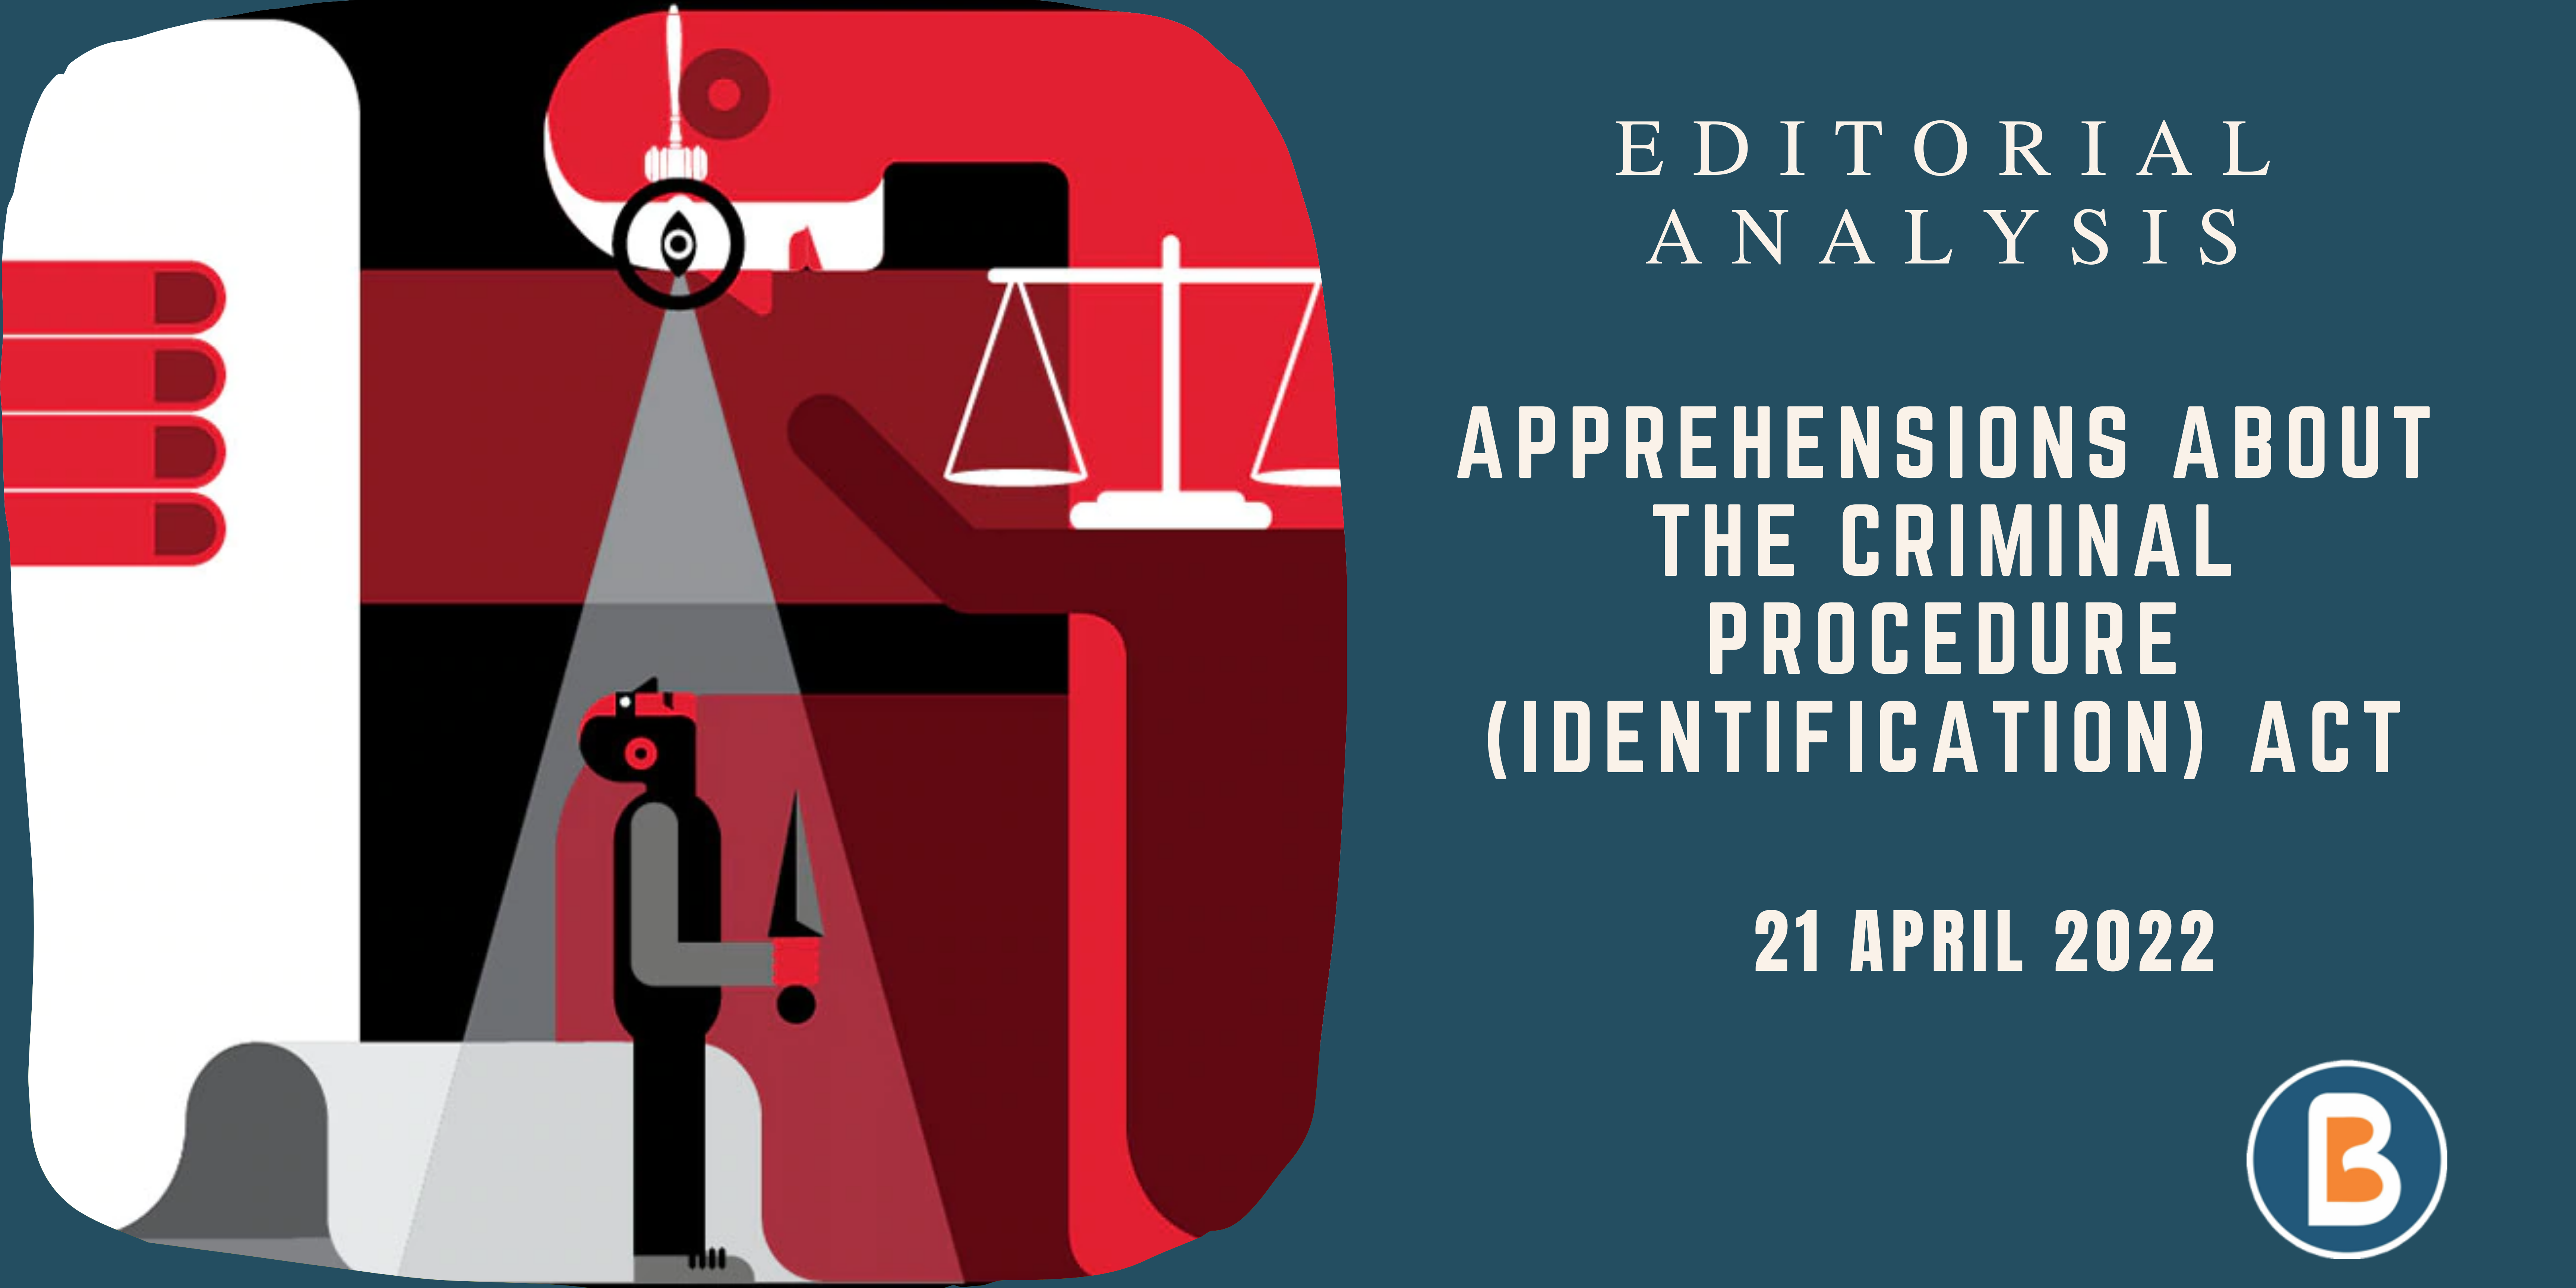 Editorial Analysis for UPSC - Apprehensions about the criminal procedure Act